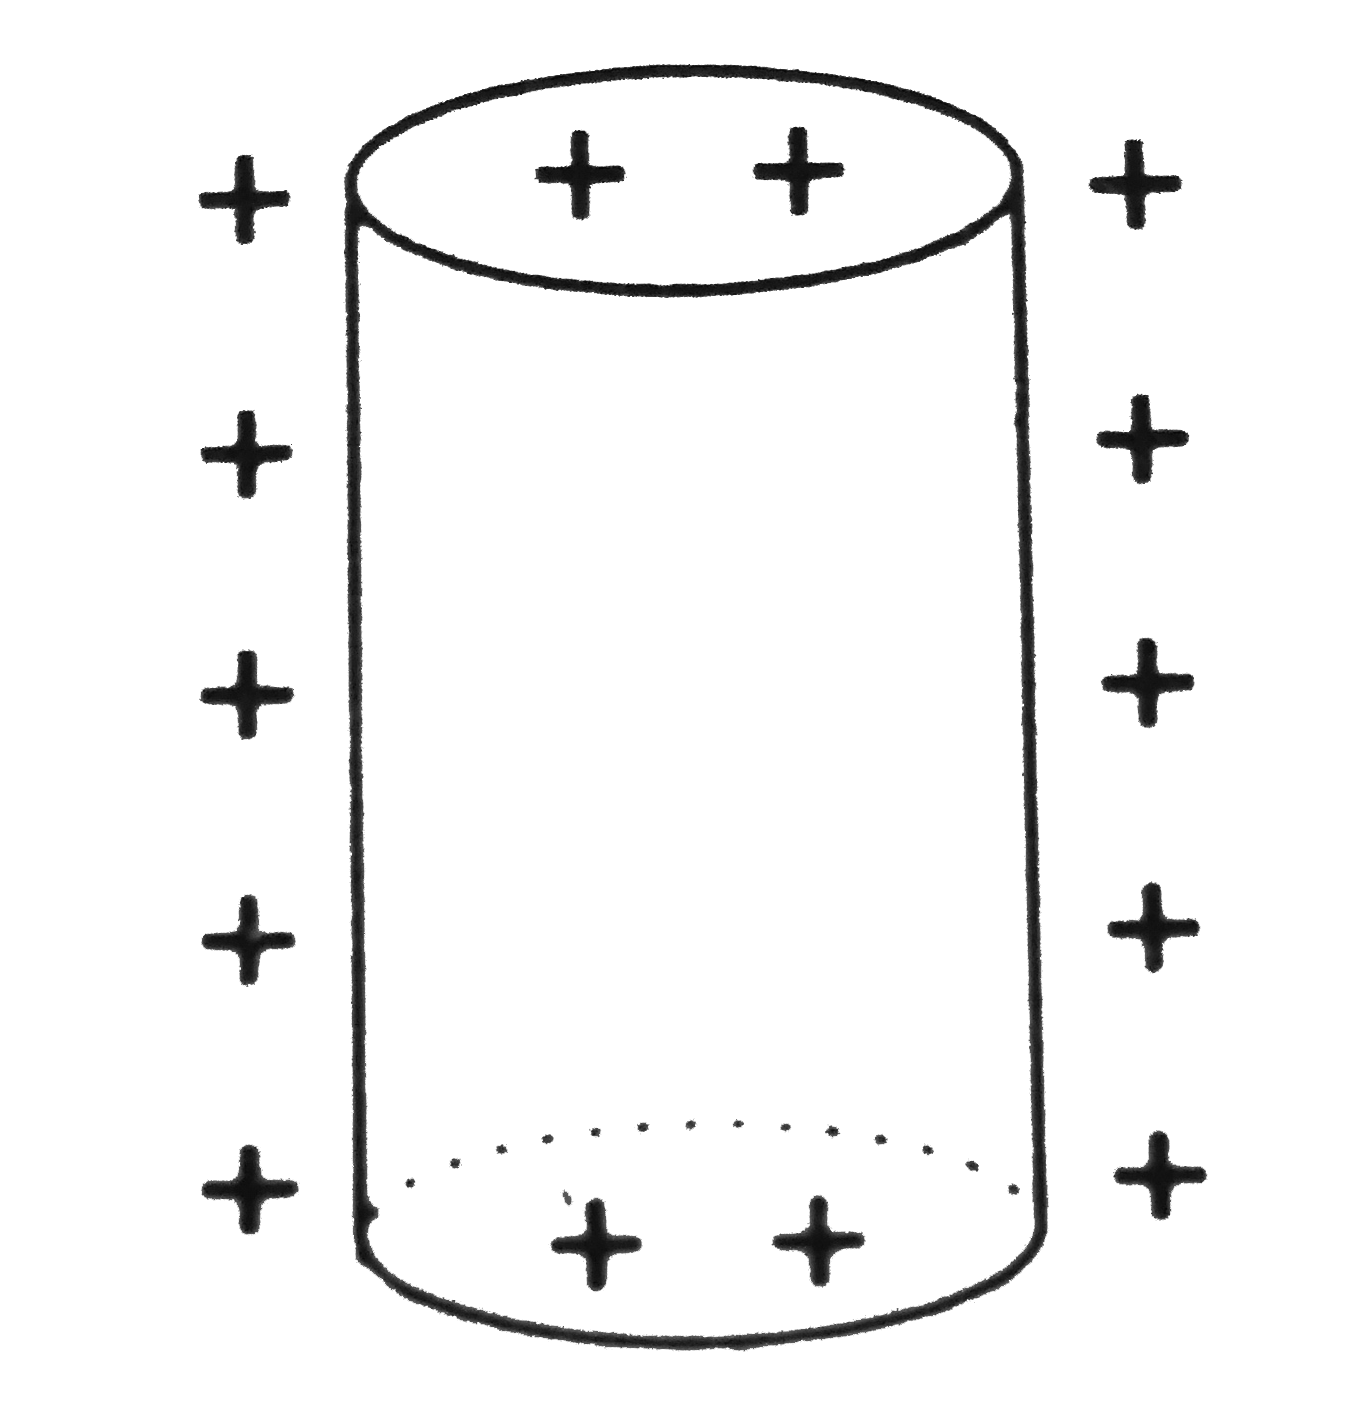 Which of the following figures correctly shows the top view sketch of the electric field lines for a uniformly charged hollow cylinder as shown in figure?